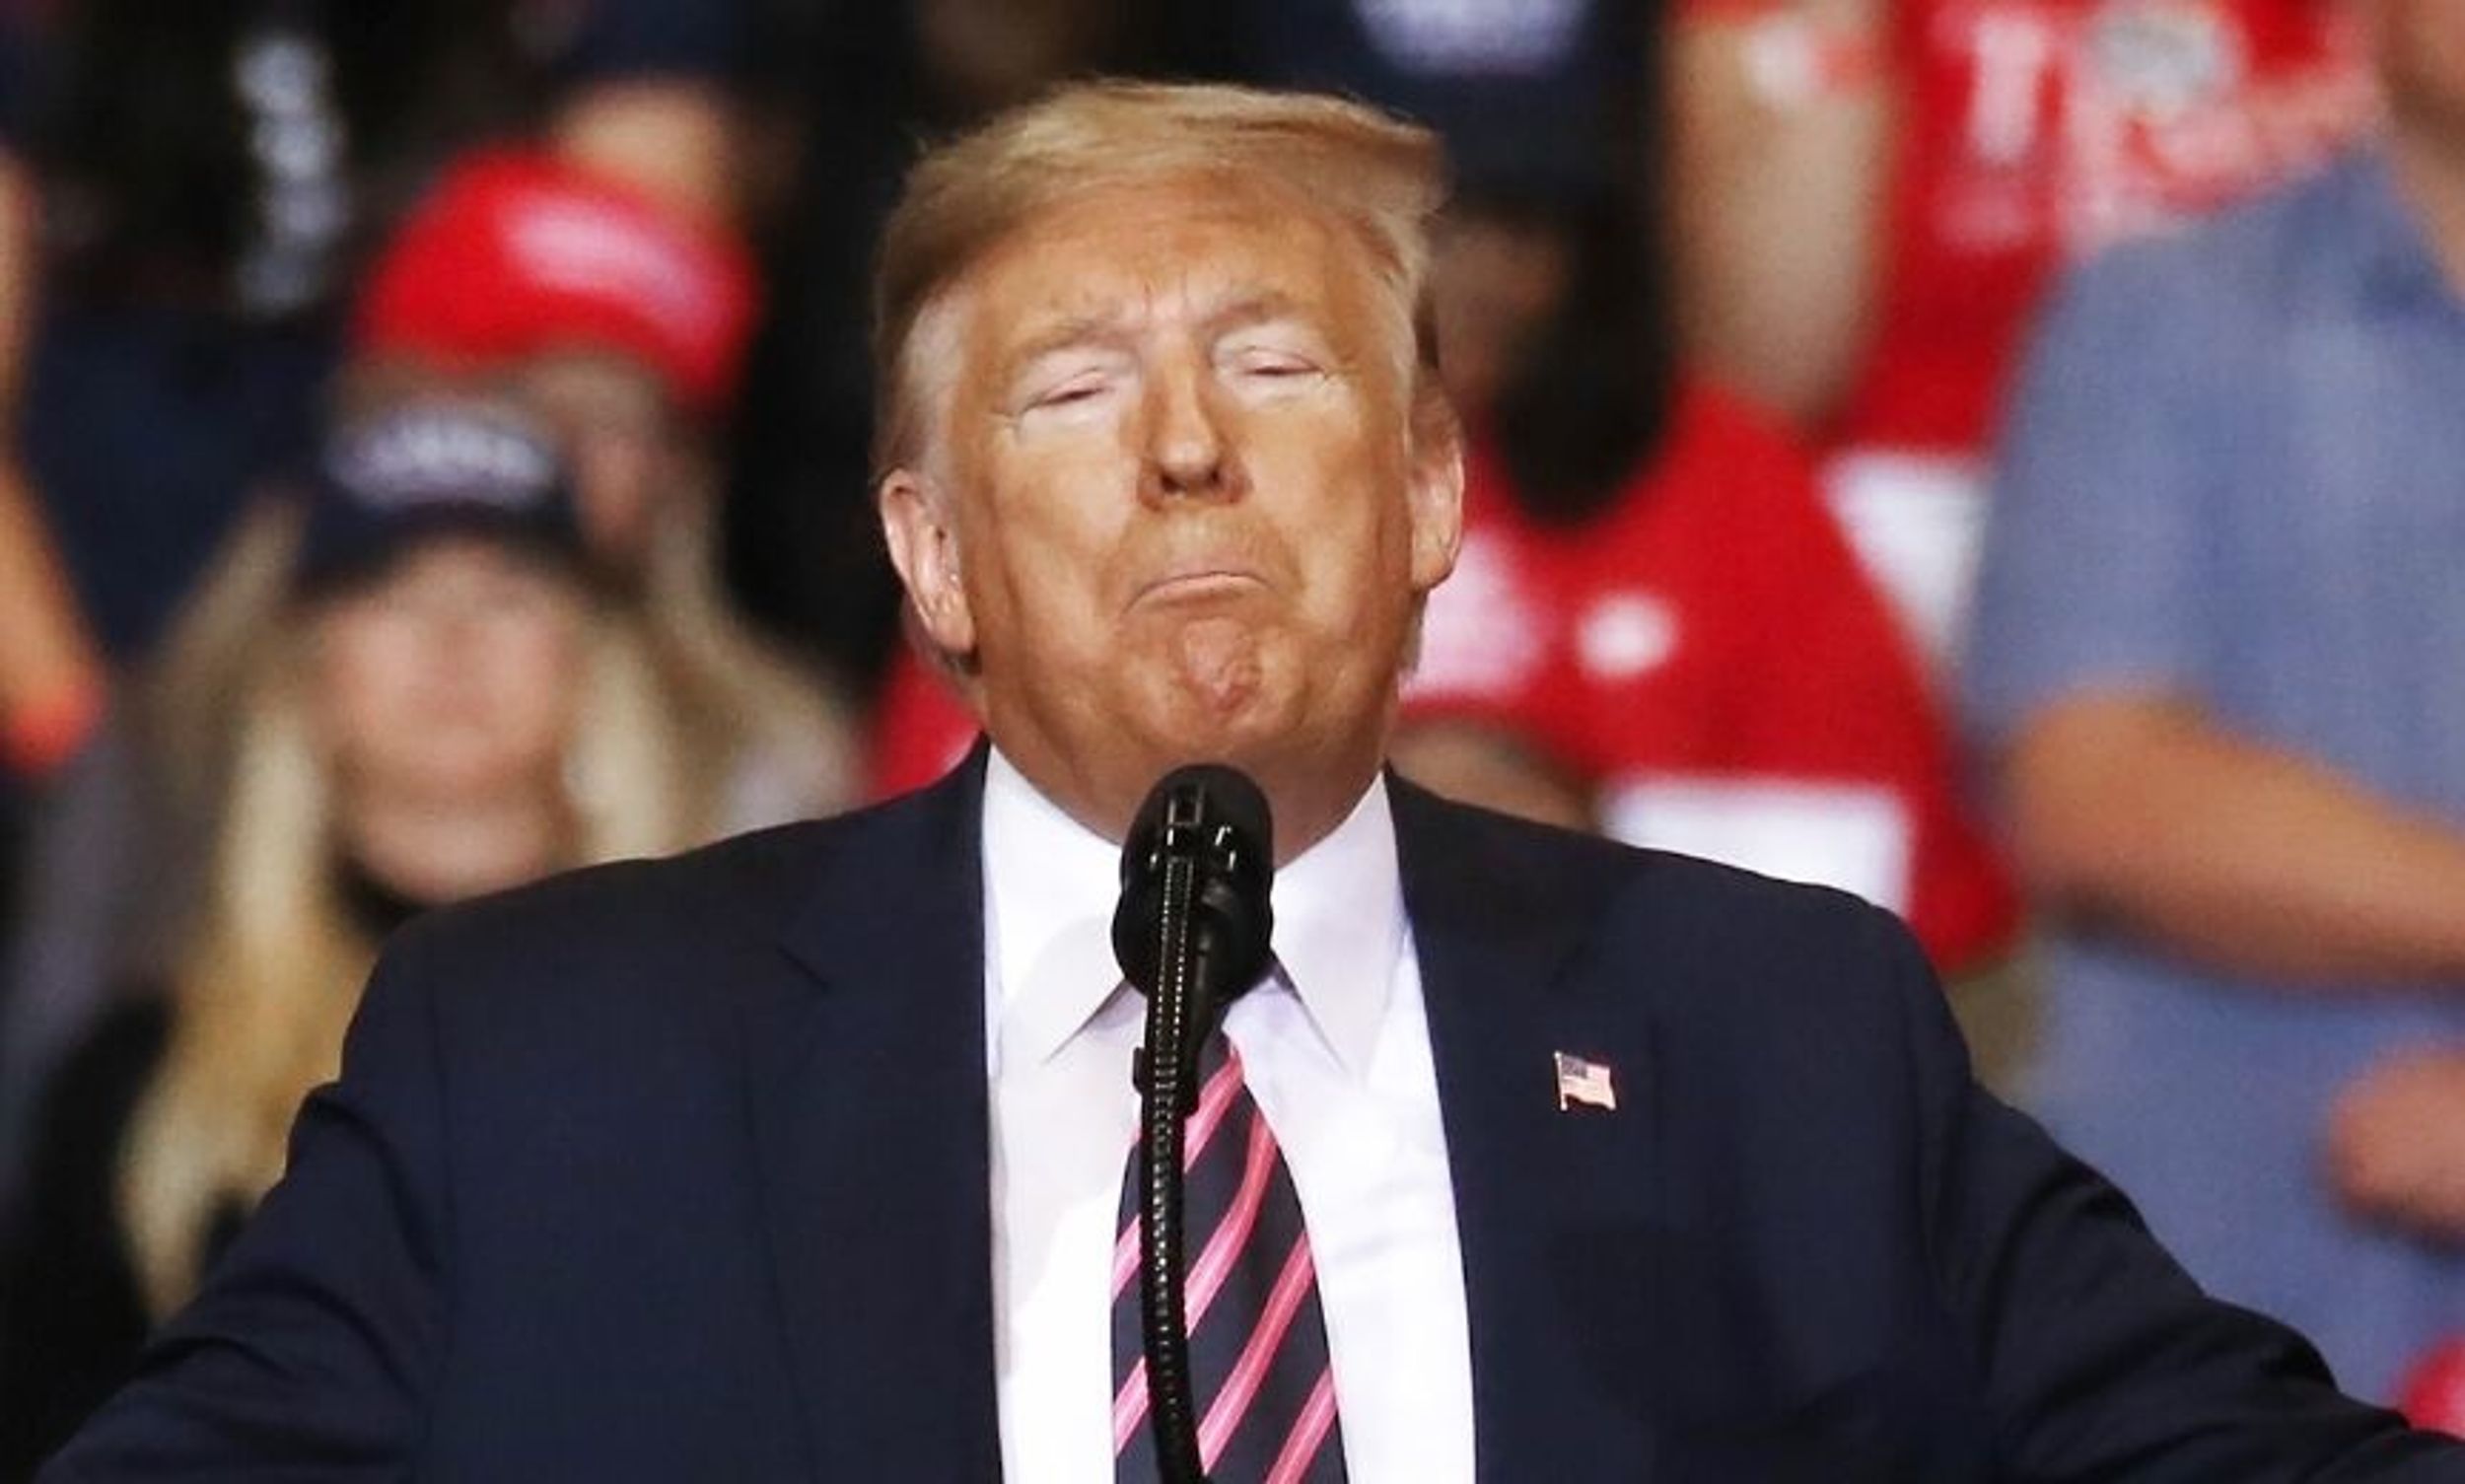 Author Asks Twitter to Share Their 'Accurate Trump 2020 Slogans' and Hoo Boy Did They Deliver